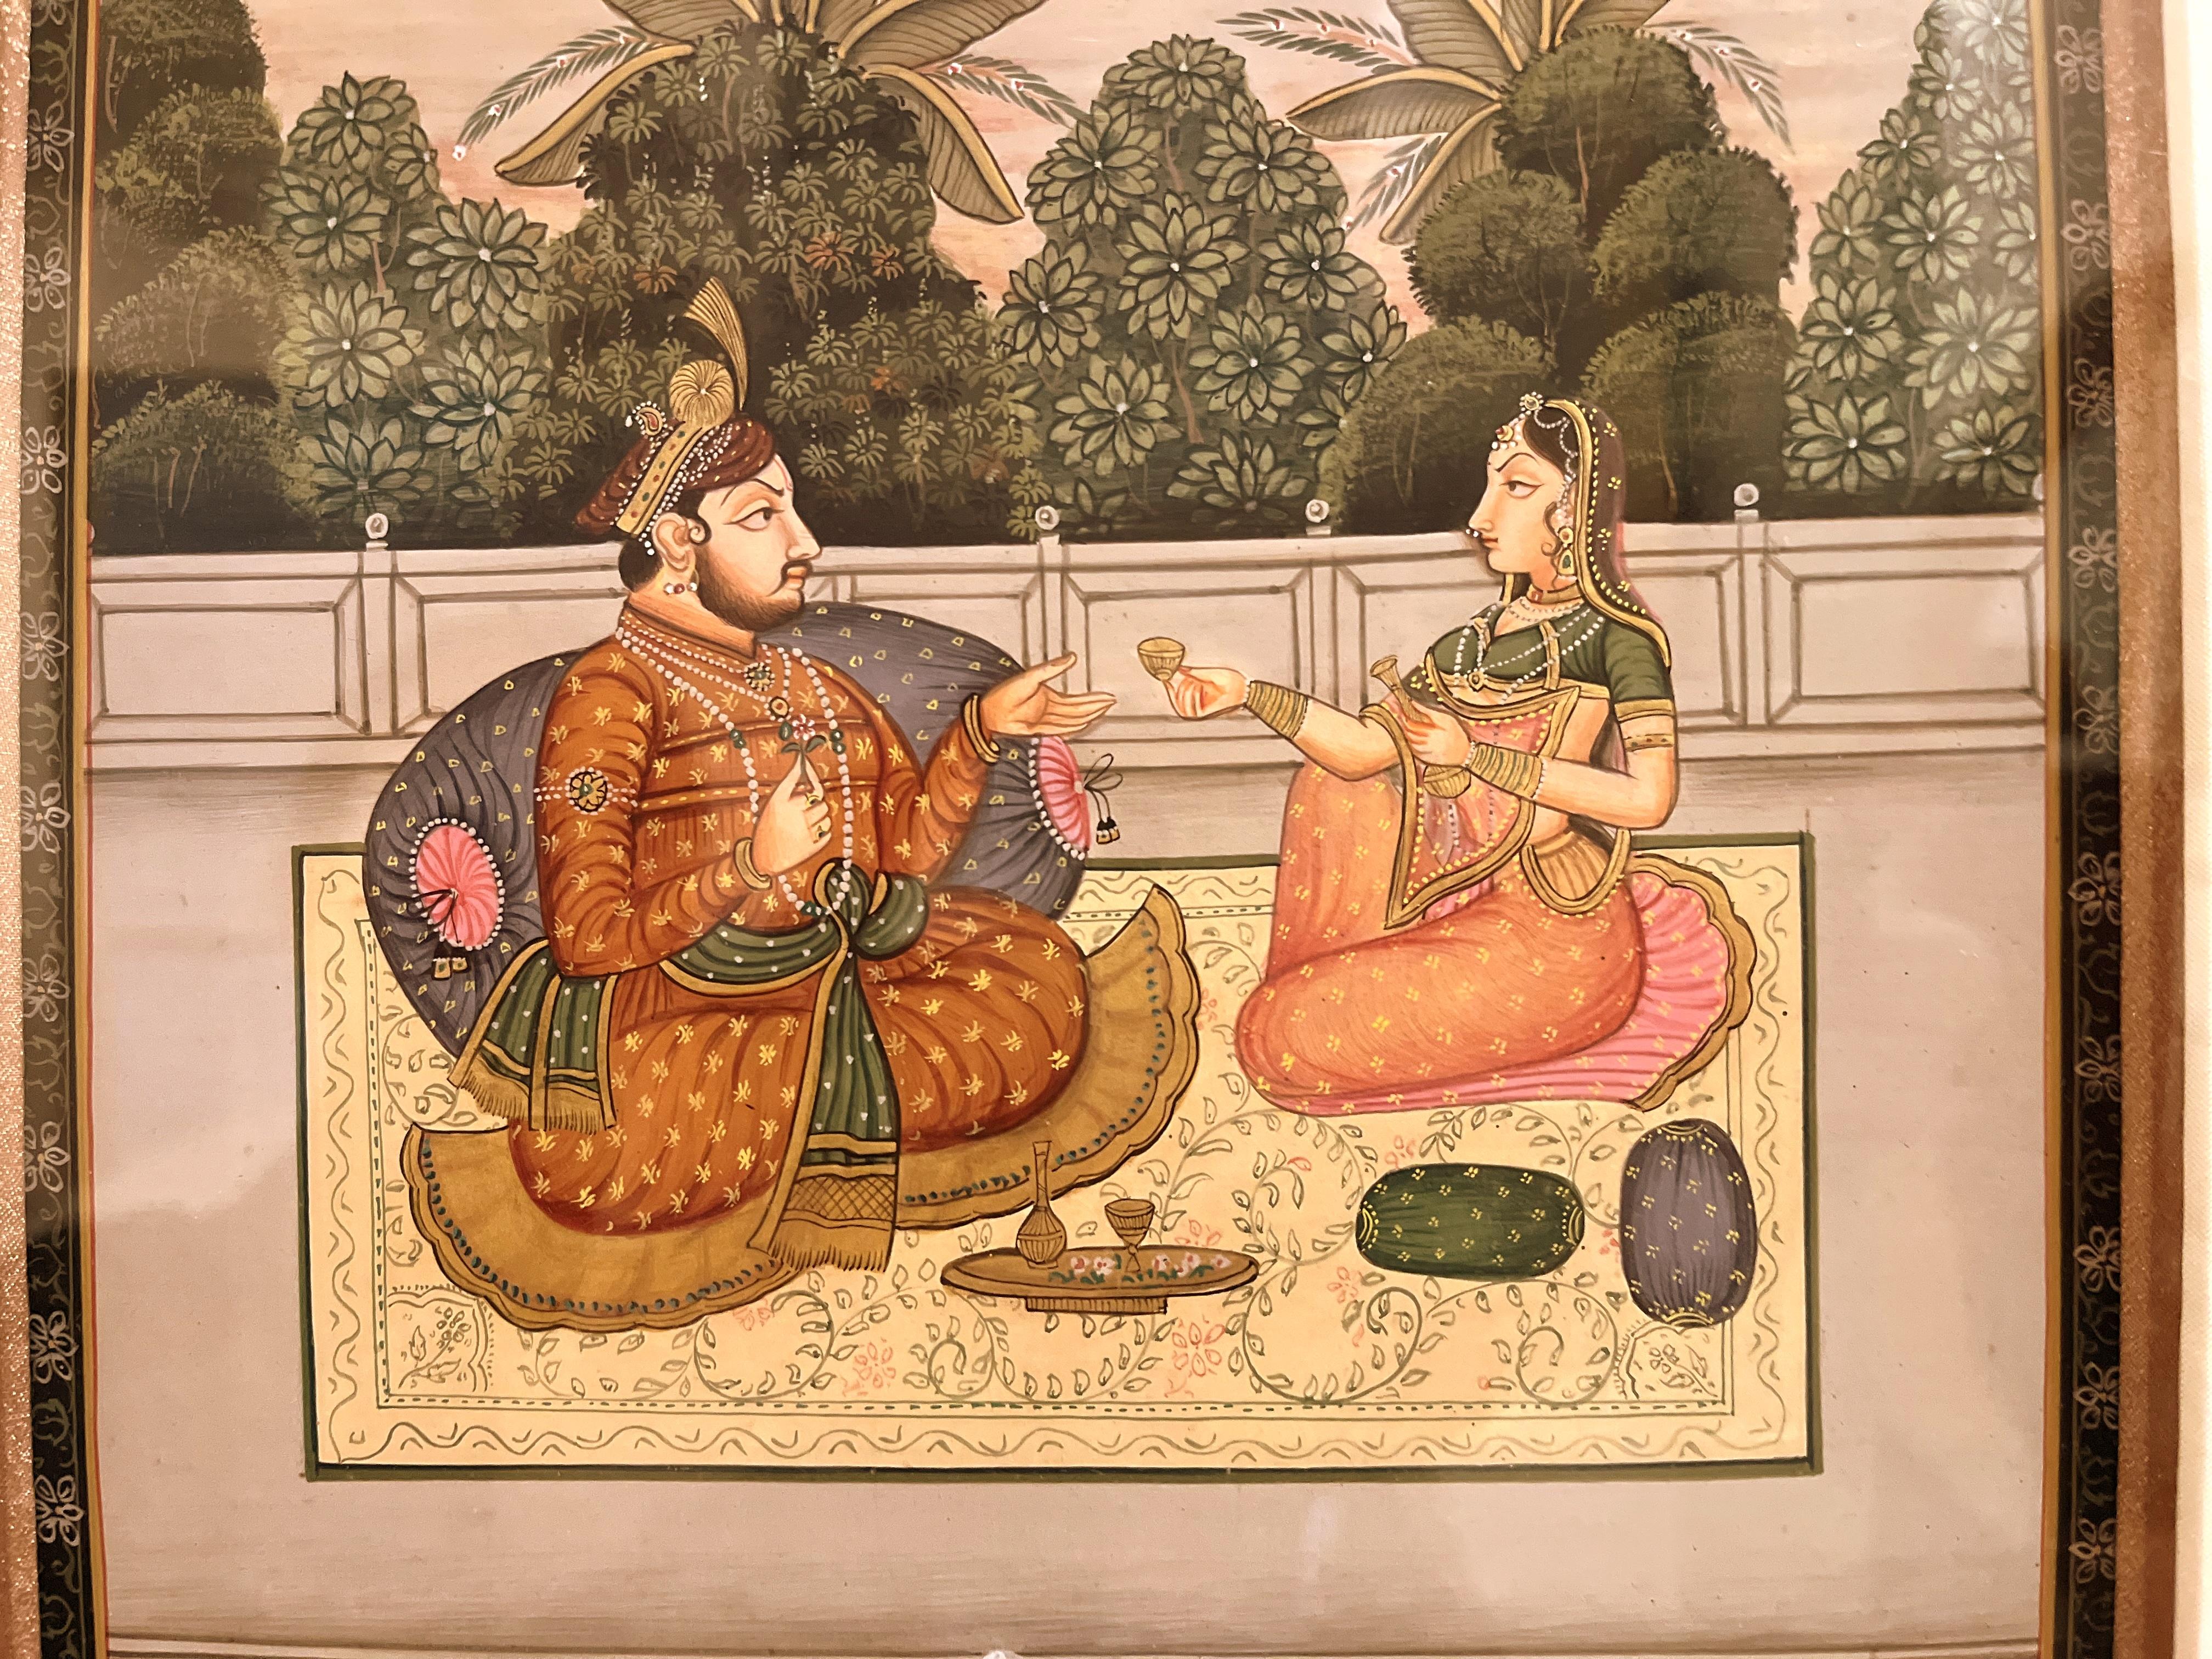 Paper Fine Indian Court Painting Framed For Sale